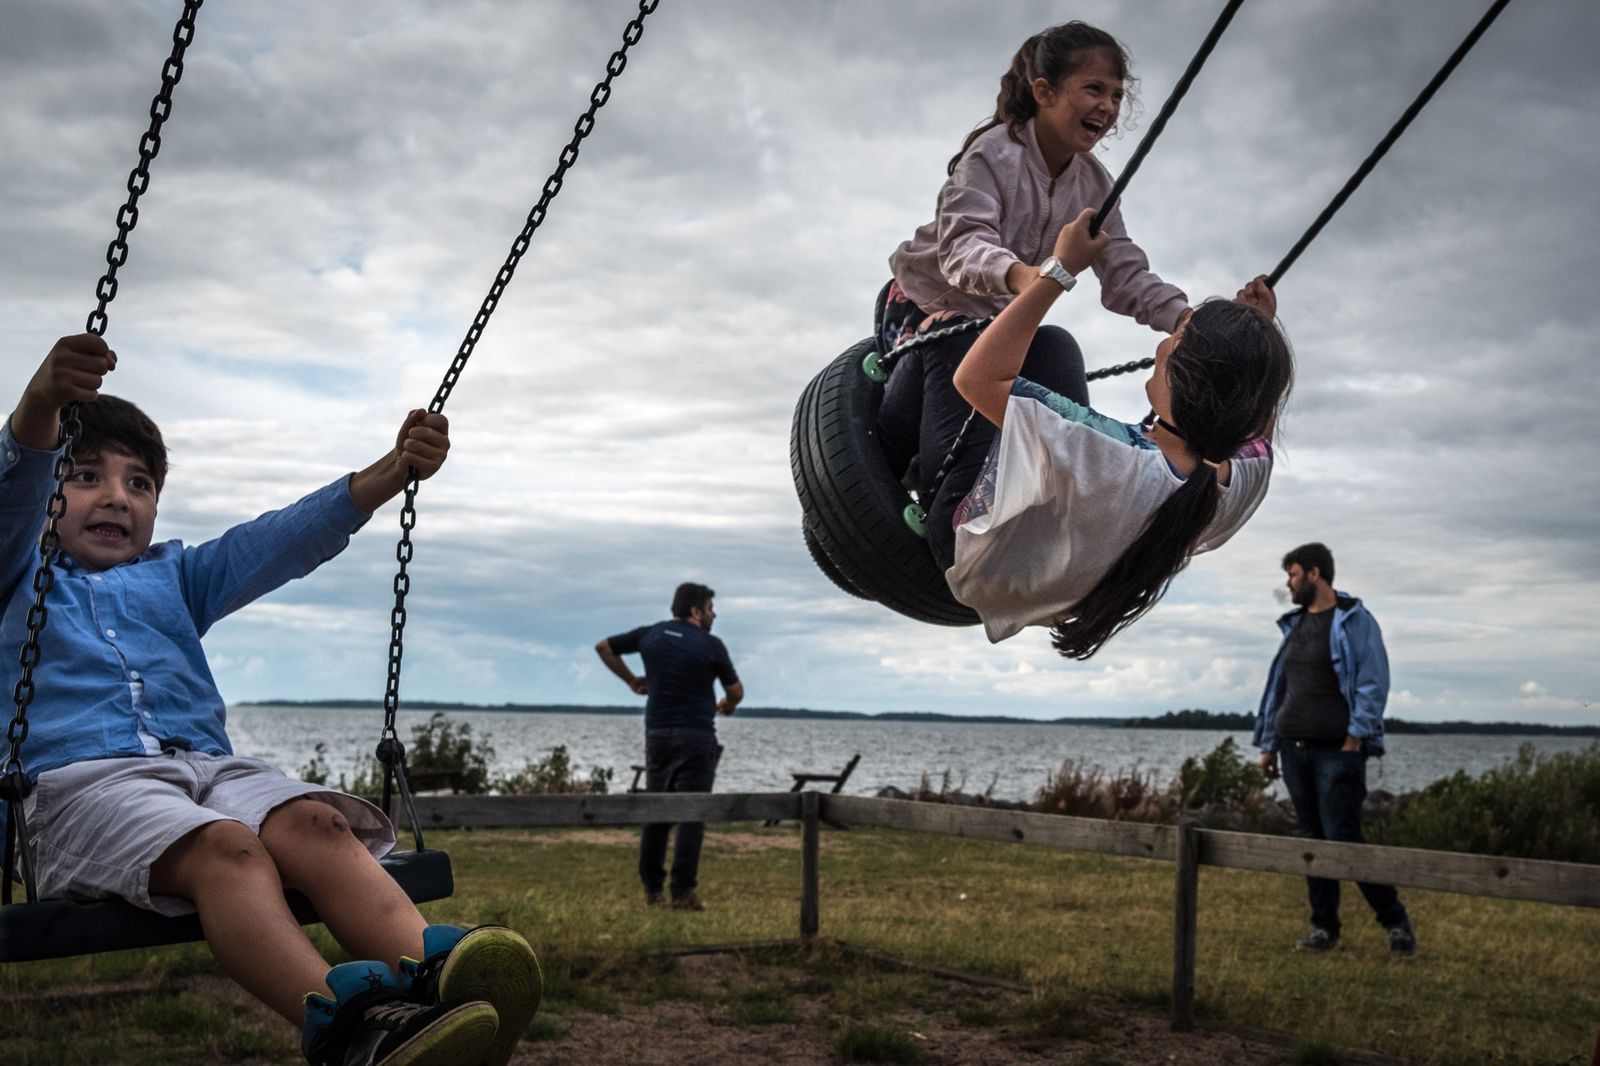 © Sergey Ponomarev - Kids of Ahmad and Farid Majid, background, swing at the park in Sweden.